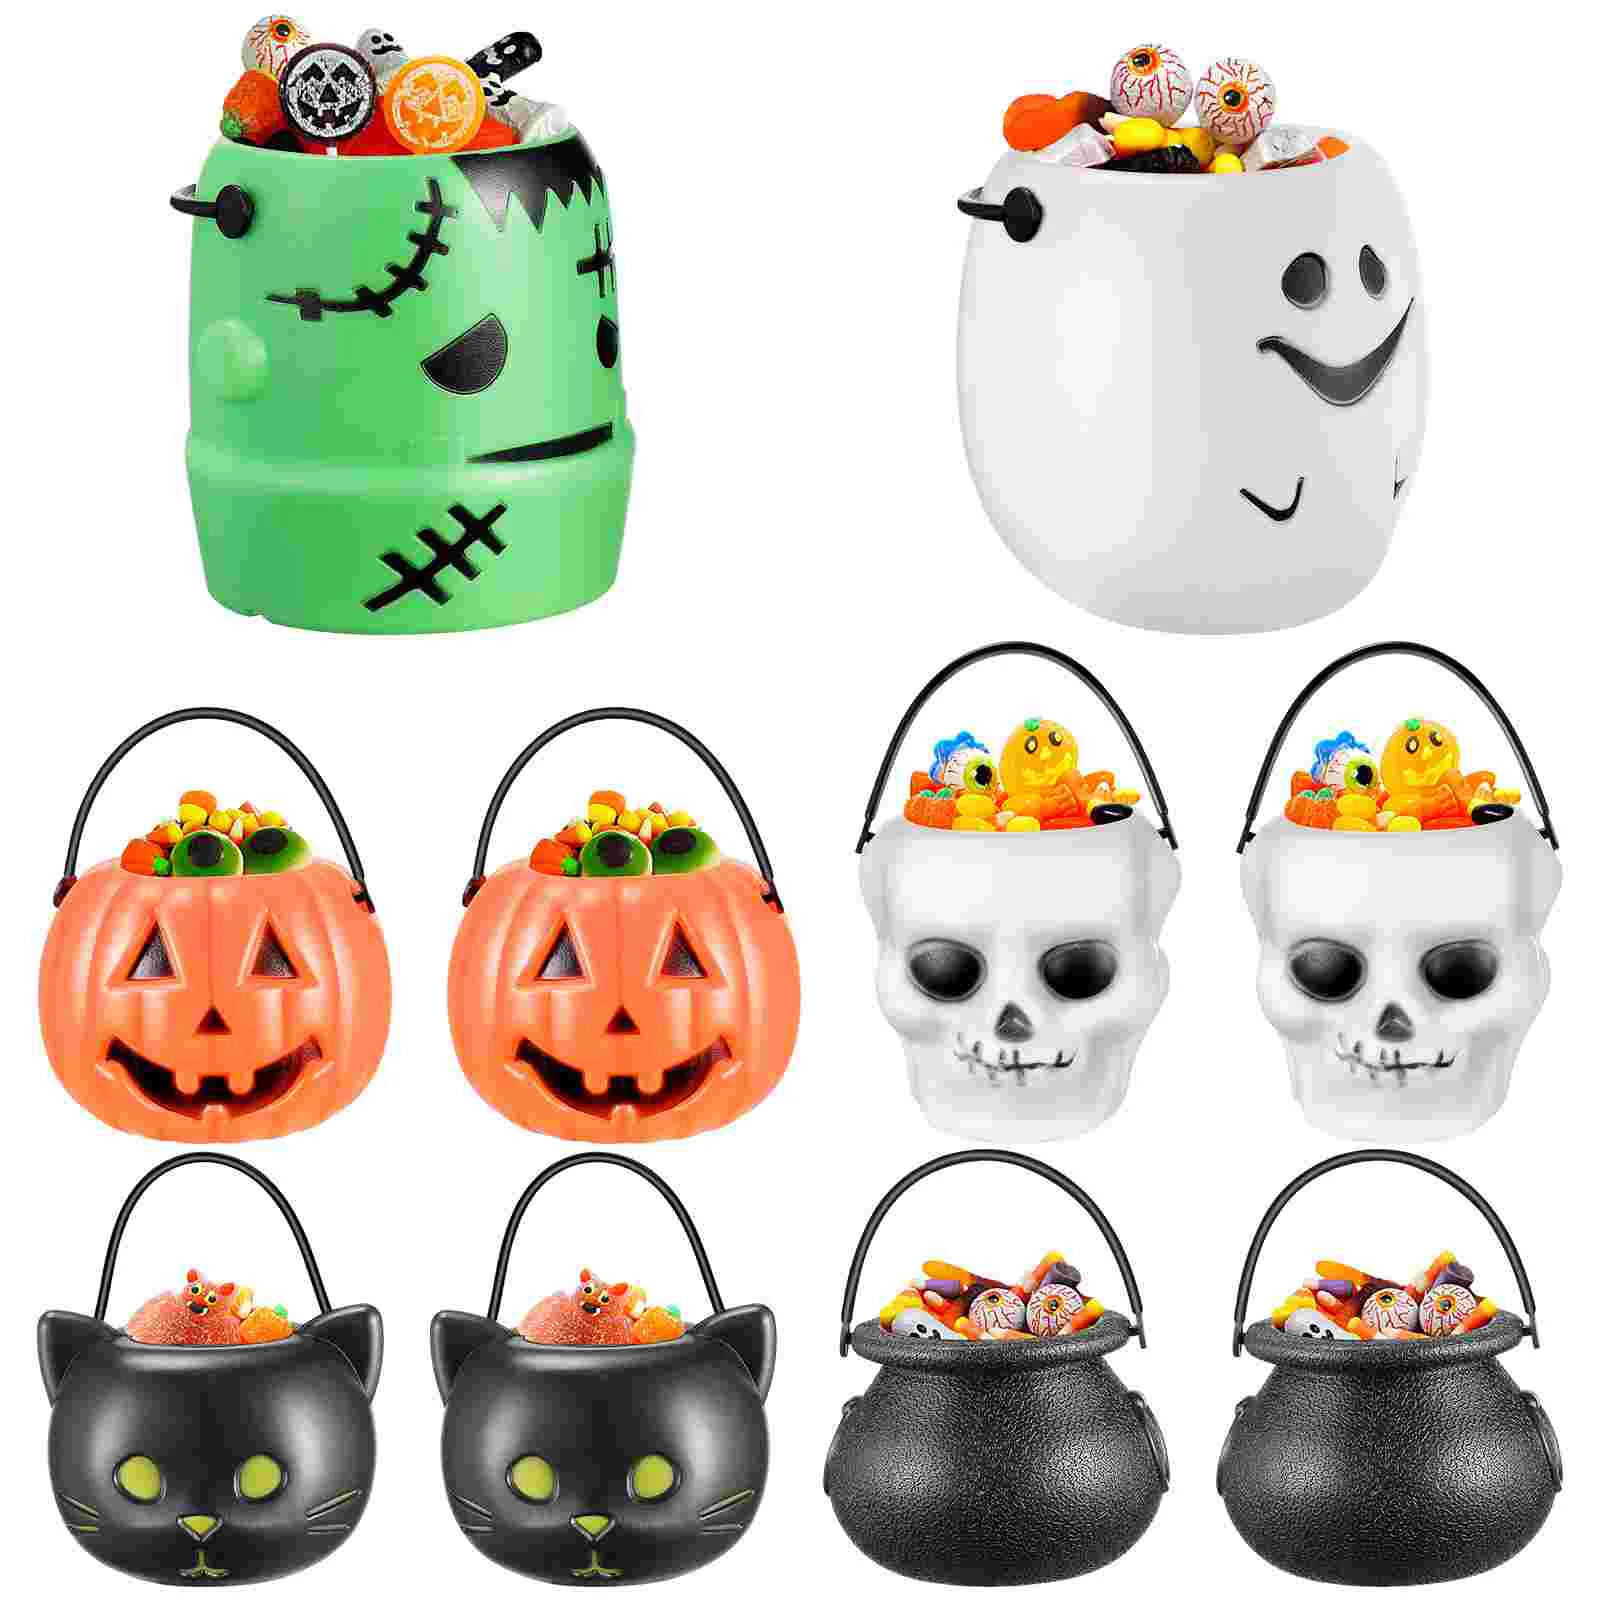 

Portable Pumpkin Bucket Halloween Party Supplies Candy Pots Holder Favors White Decor Home utensils for hospitality